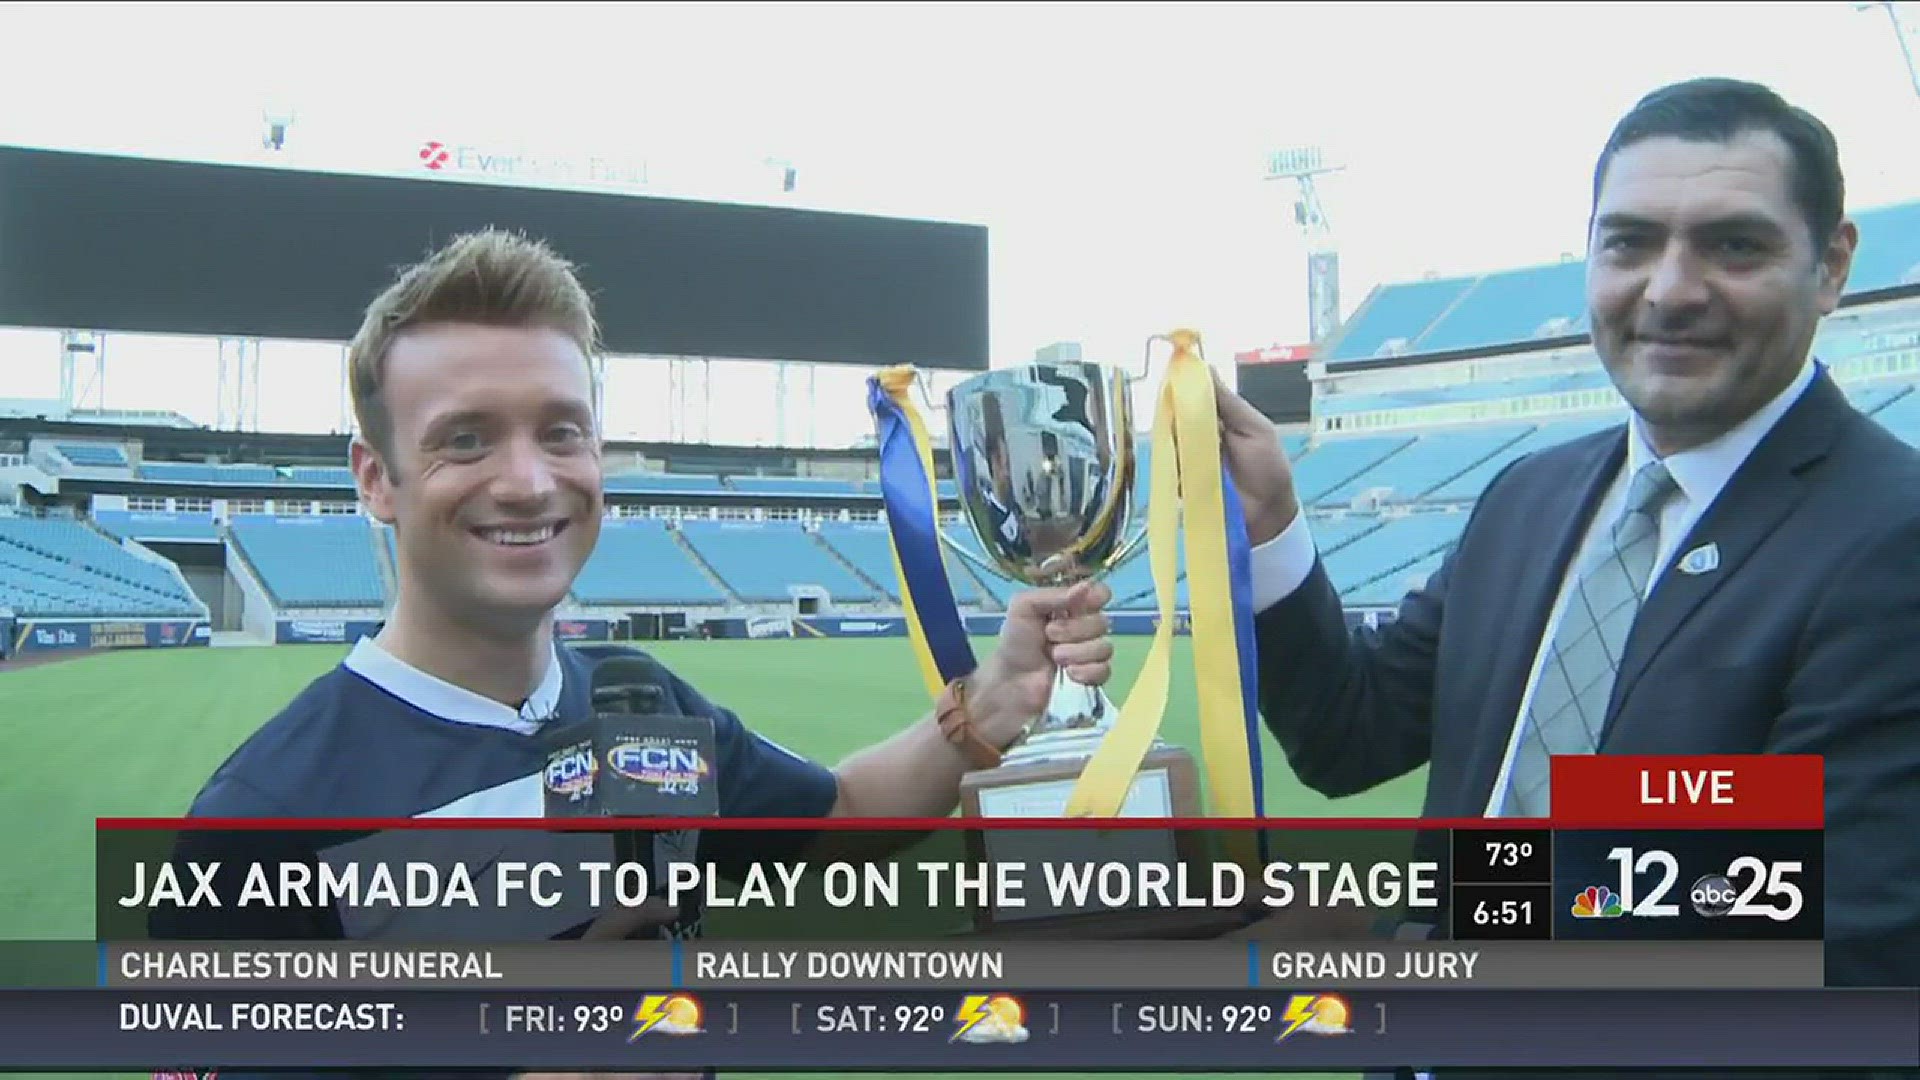 The Jacksonville Armada FC will host their first international friendly against the Boca Juniors soccer club of Argentina.